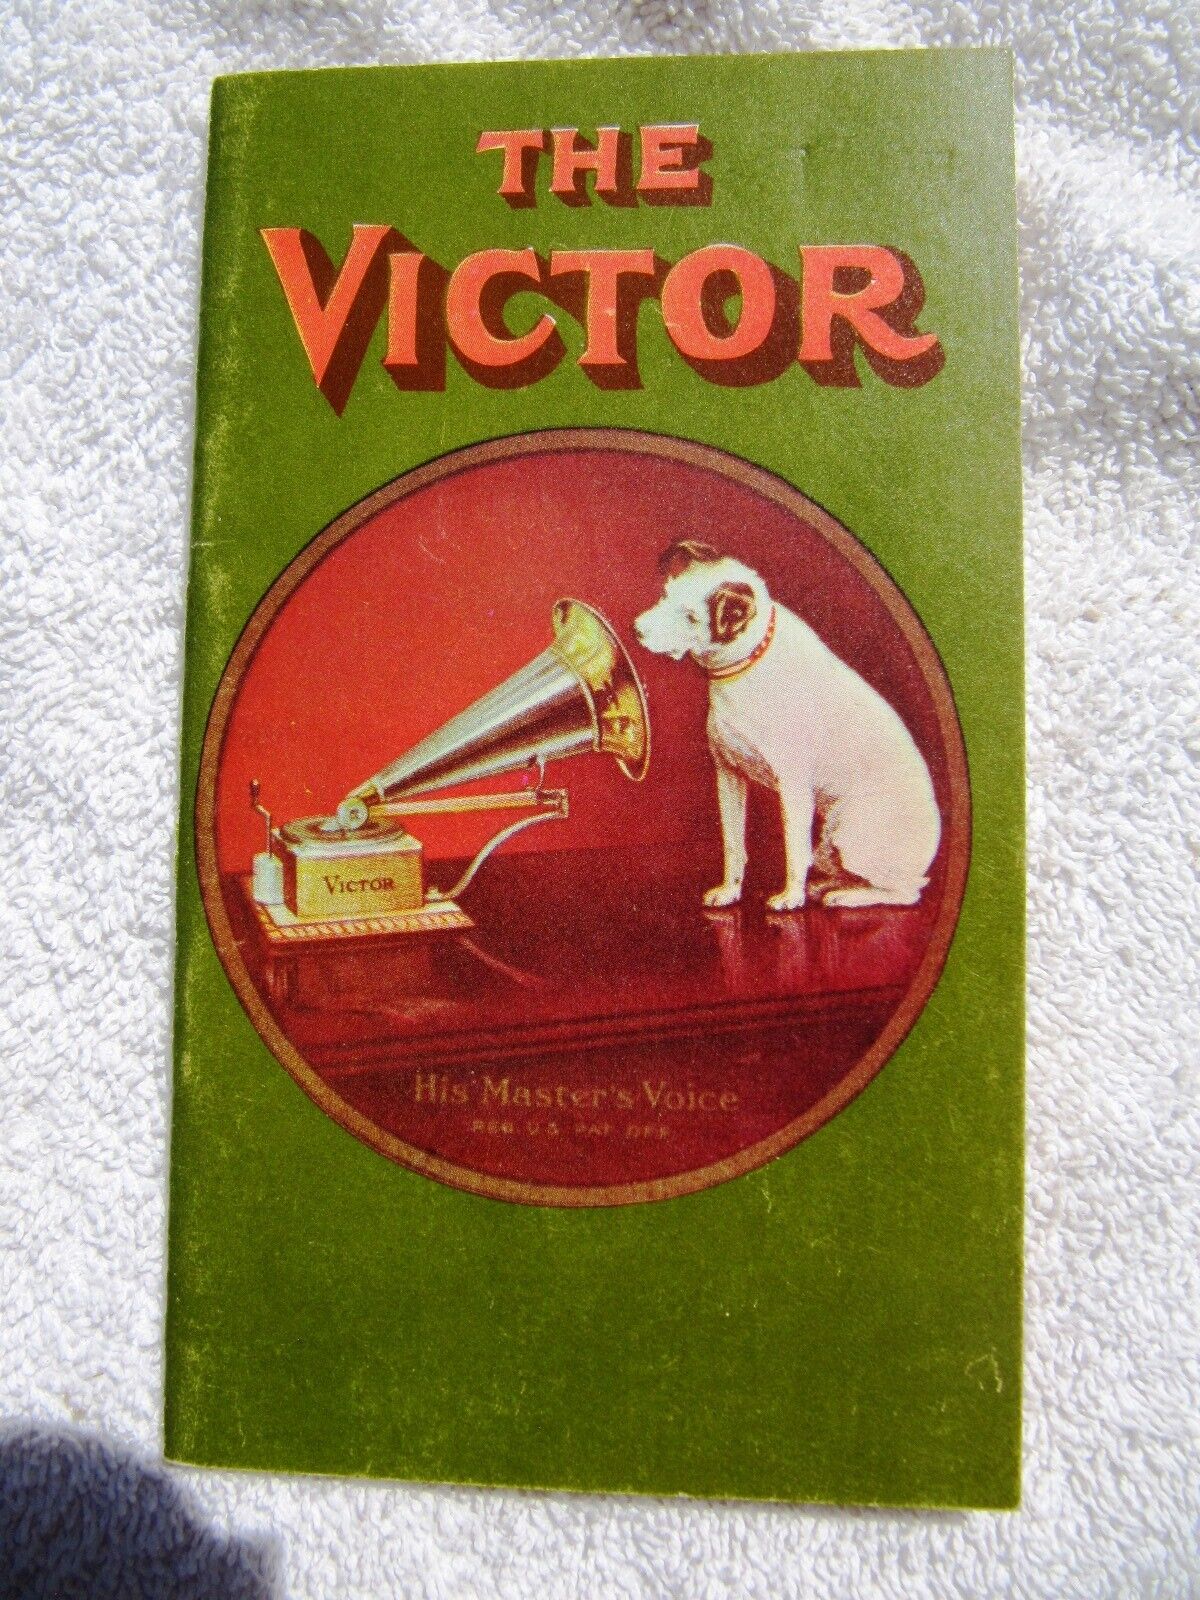 1909 THE VICTOR Talking Machine Catalog Auxetophone Victrola XII XVI Phonograph 